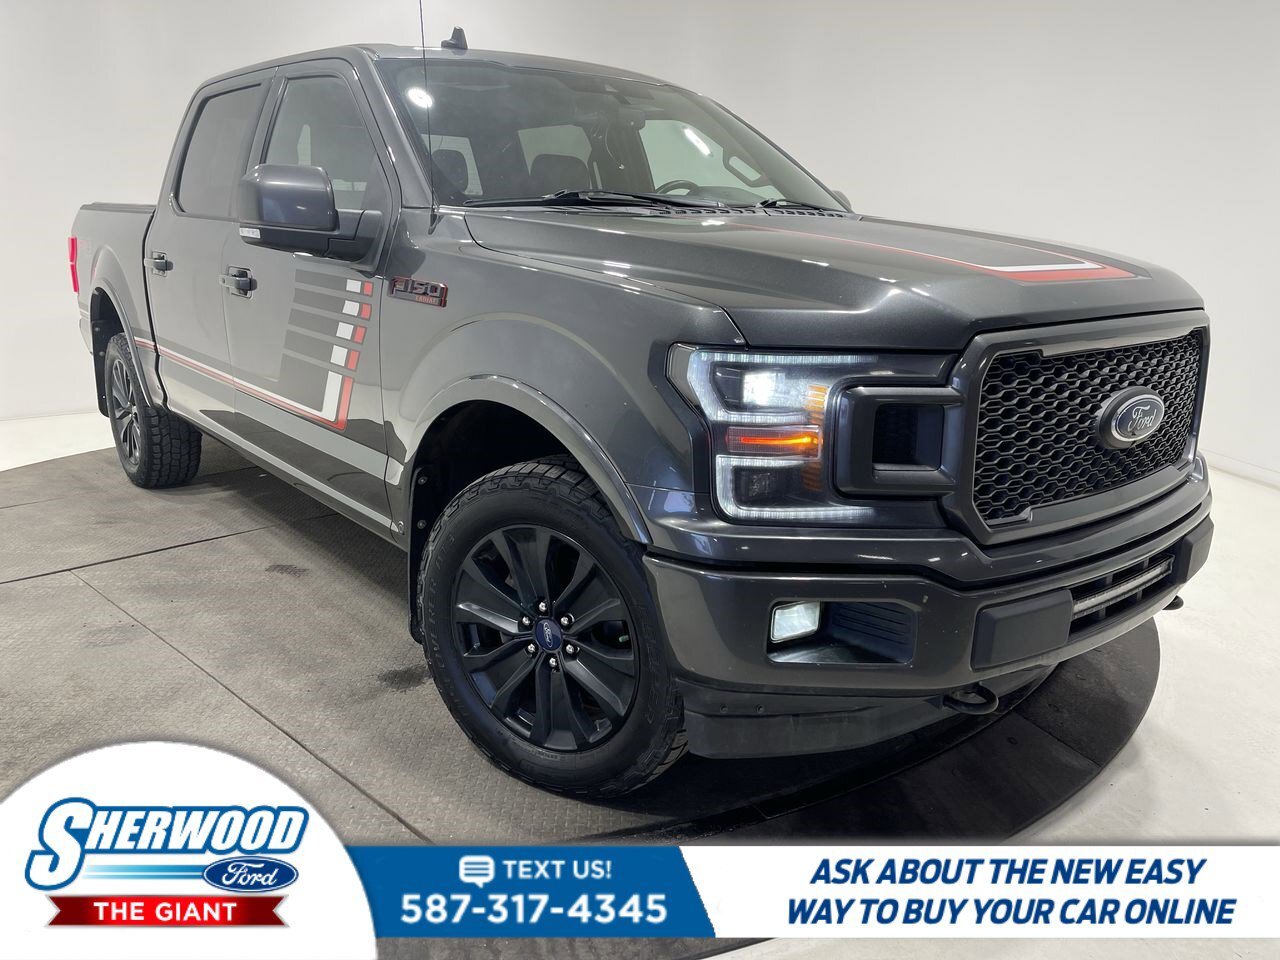 2019 Ford F-150 Lariat - $0 Down $137 Weekly - CLEAN CARFAX